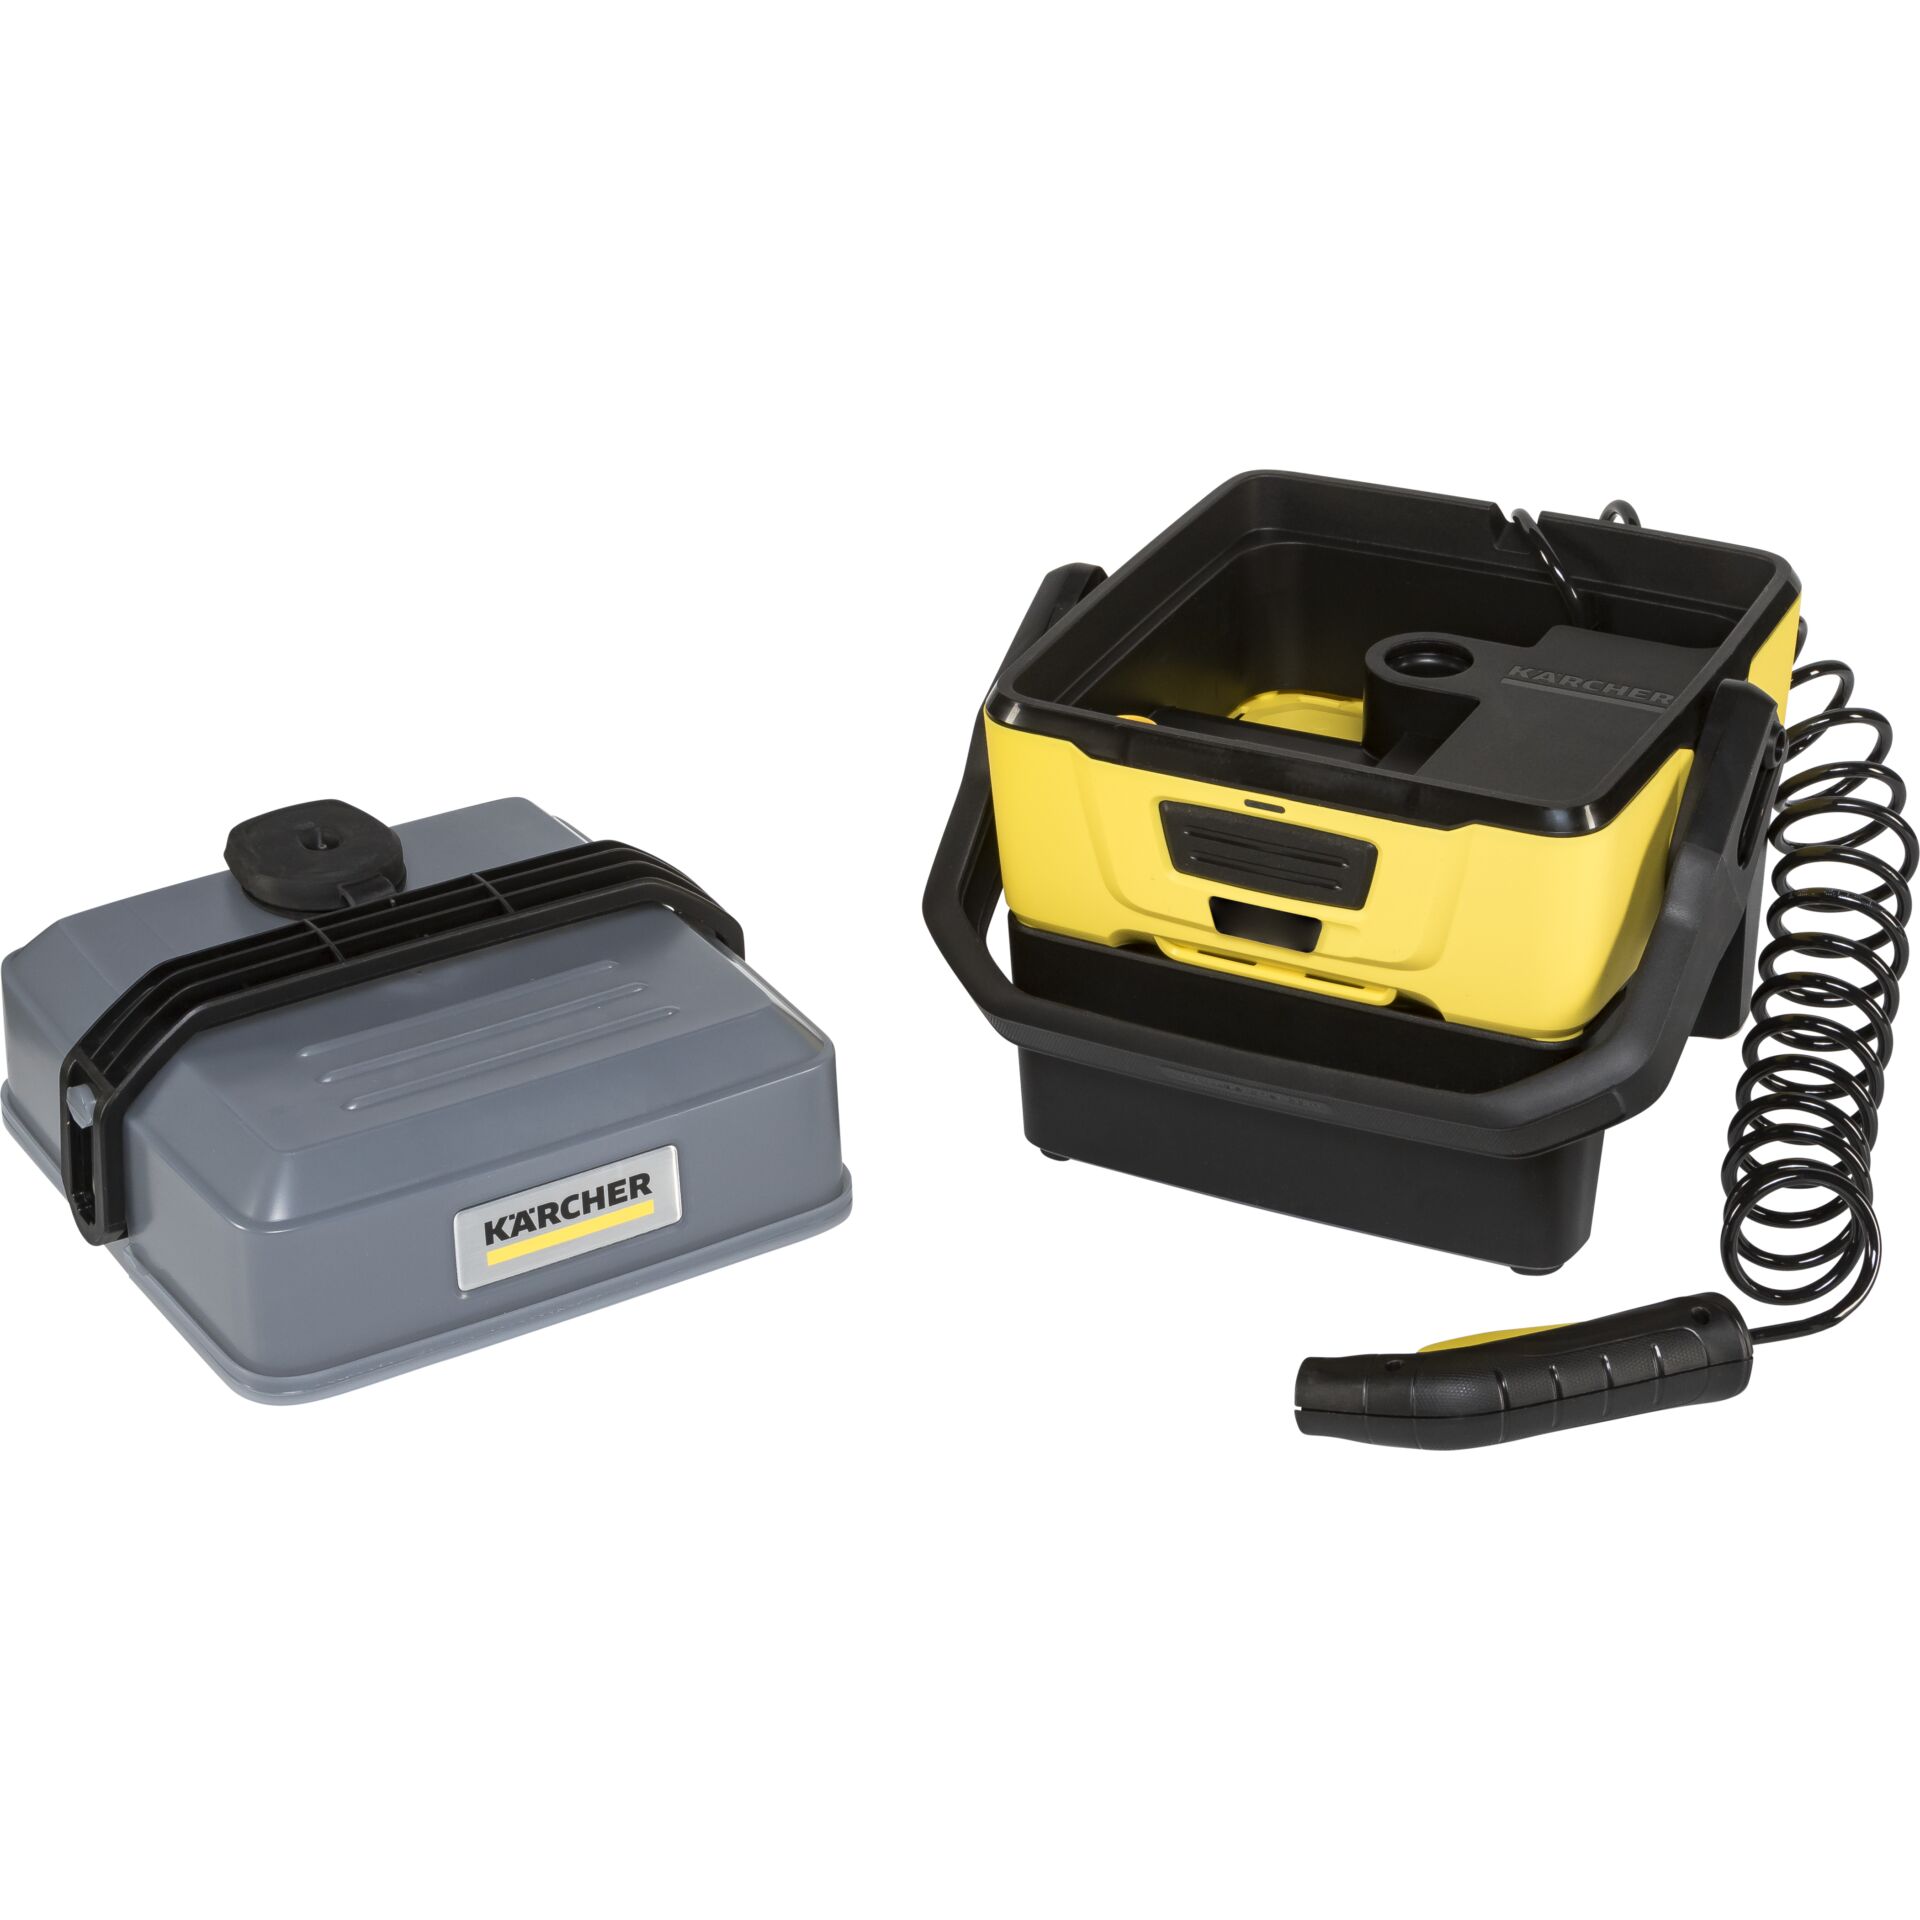 Karcher OC3 Mobile Outdoor Cleaner - Battery Powered Pressure